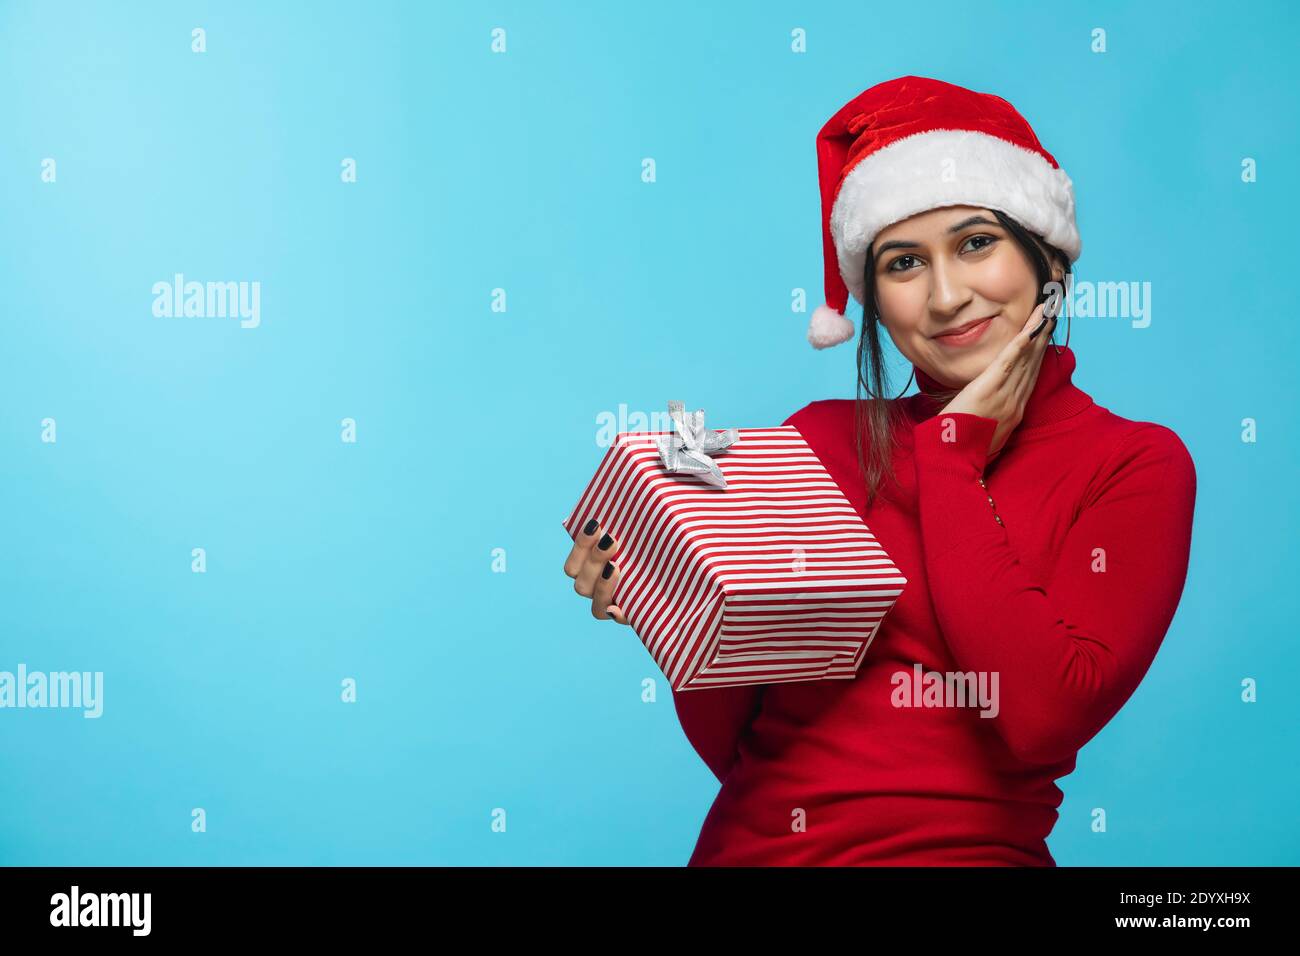 Portrait of Smiling young woman wearing Christmas hat and holding gift box Stock Photo